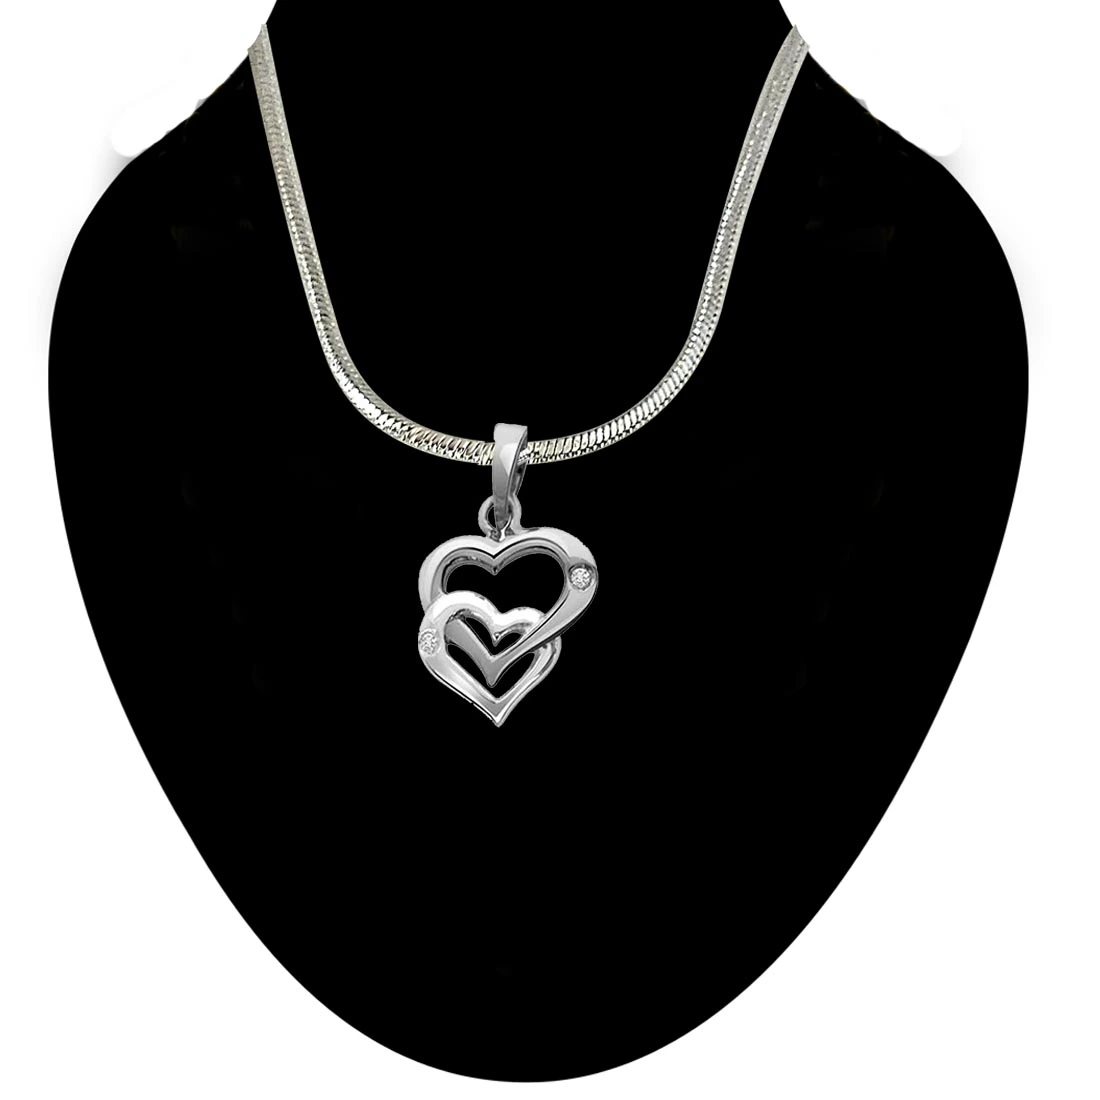 Unique Bonding - Real Diamond & Sterling Silver Pendant with 18 IN Chain (SDP110)